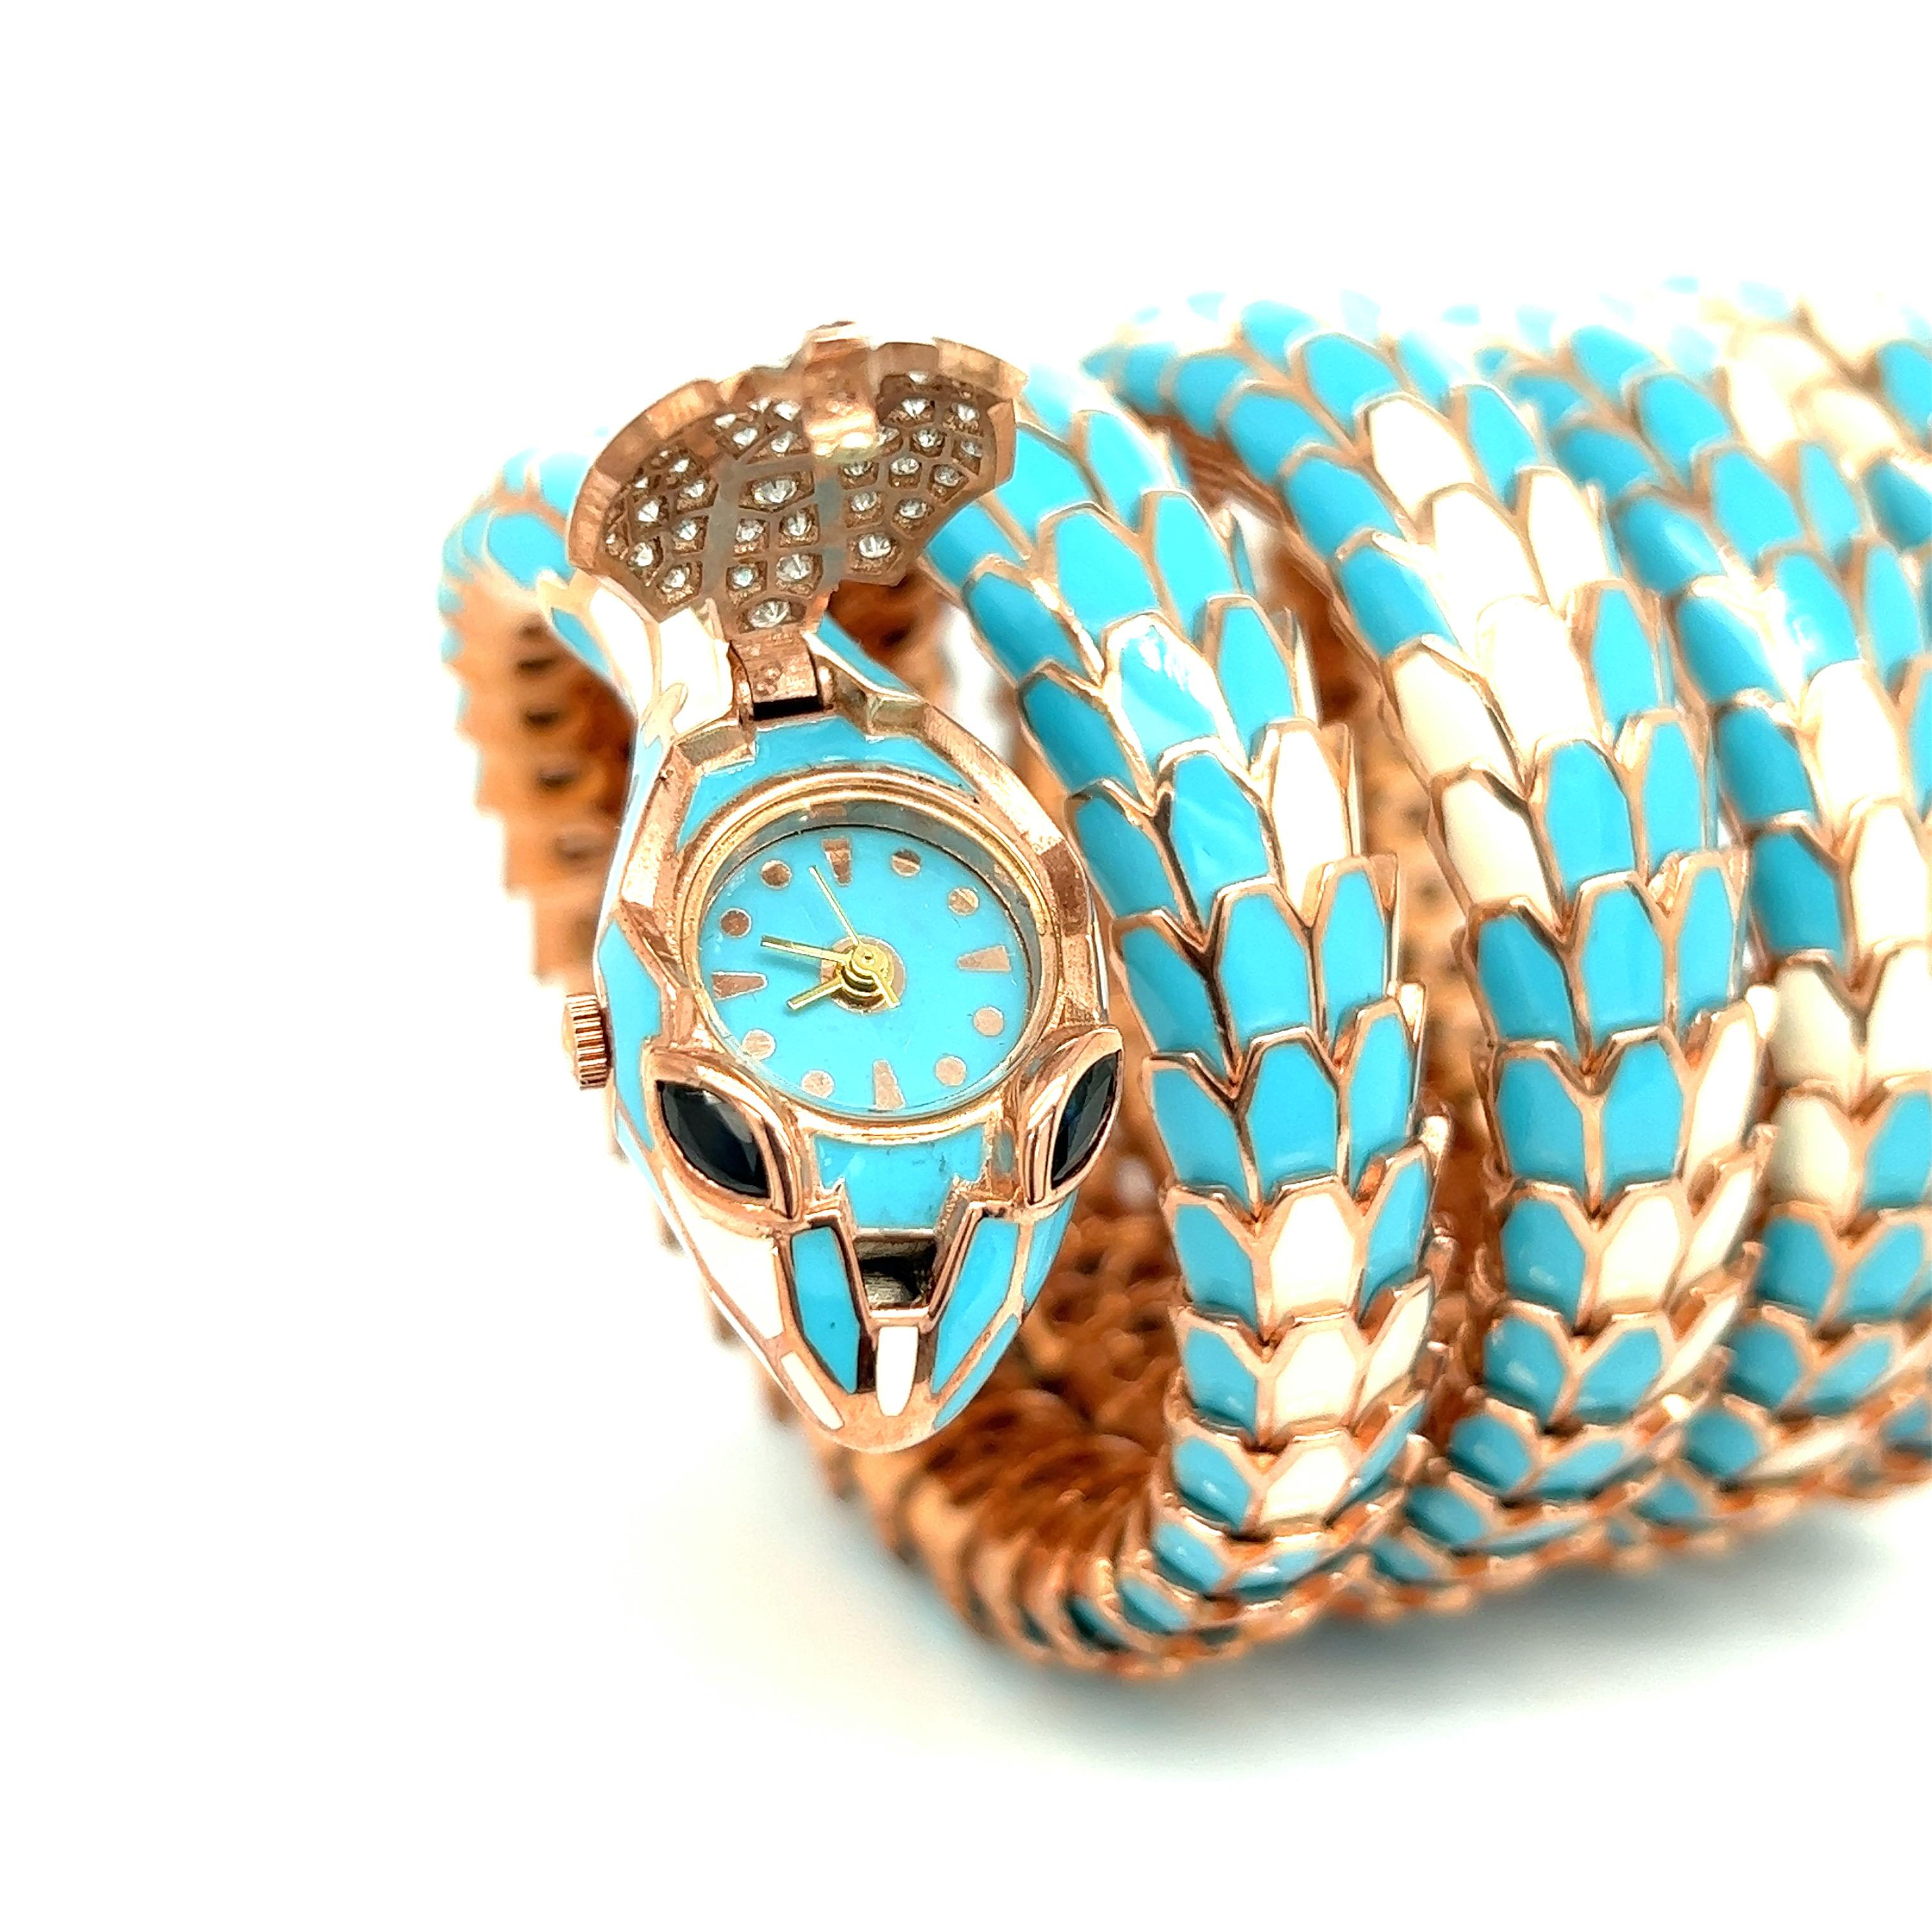 Alexis NY Light Blue & White Enamel Five Row Watch Wrap Bracelet

The body is made of sterling silver with a rose gold tone, the head and tail are made of 18 karat white gold; the white gold is set with round cut diamonds weighing 1.10 carats; the